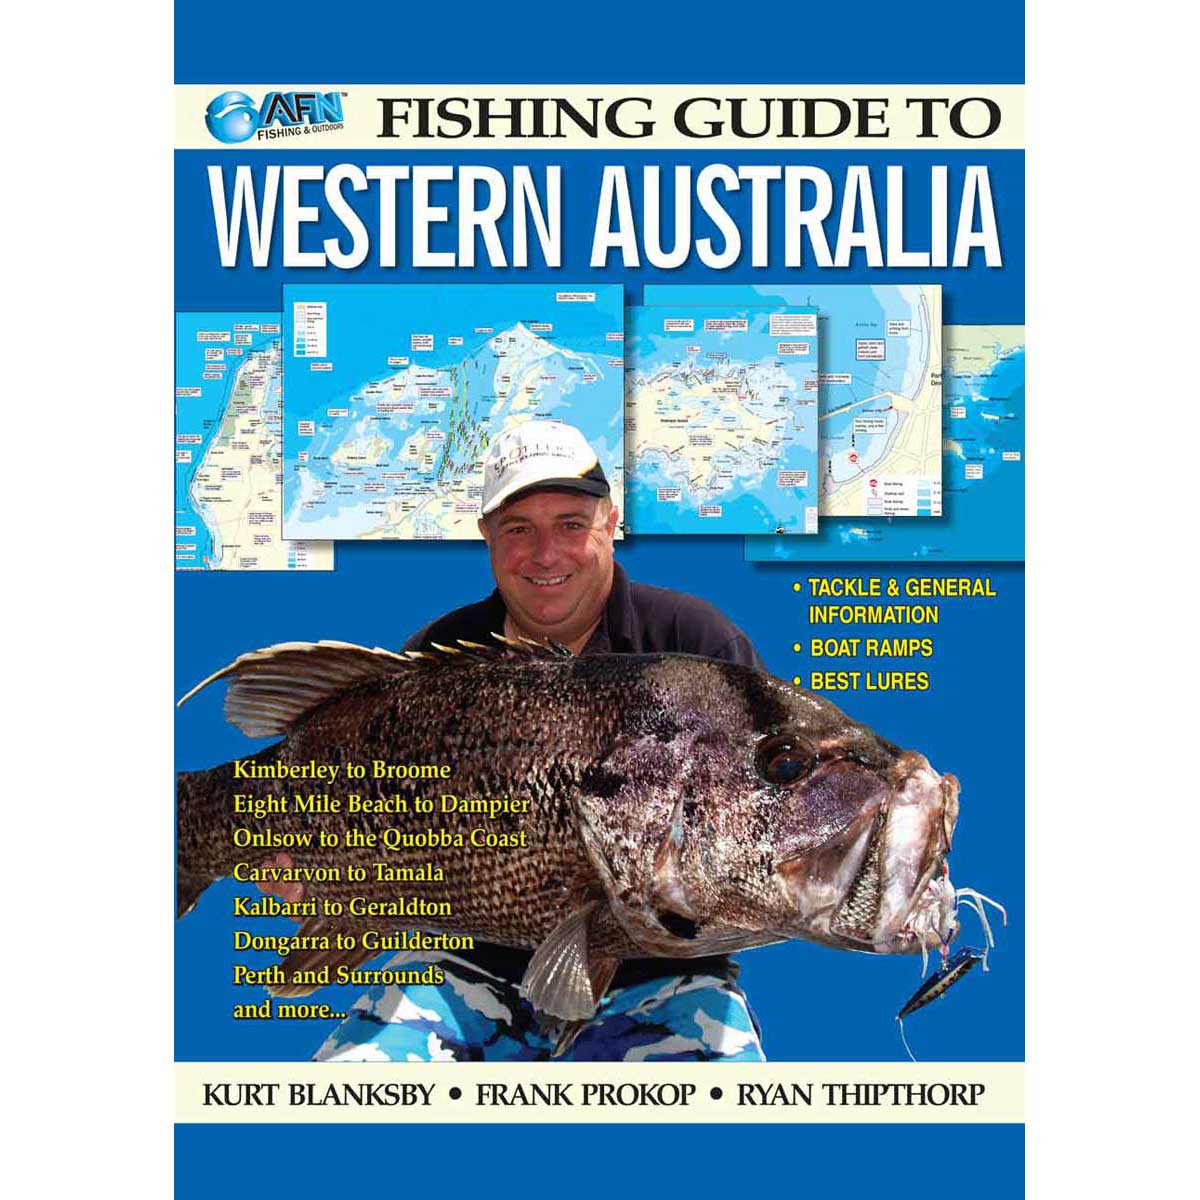 AFN Fishing Guide to Western Australia